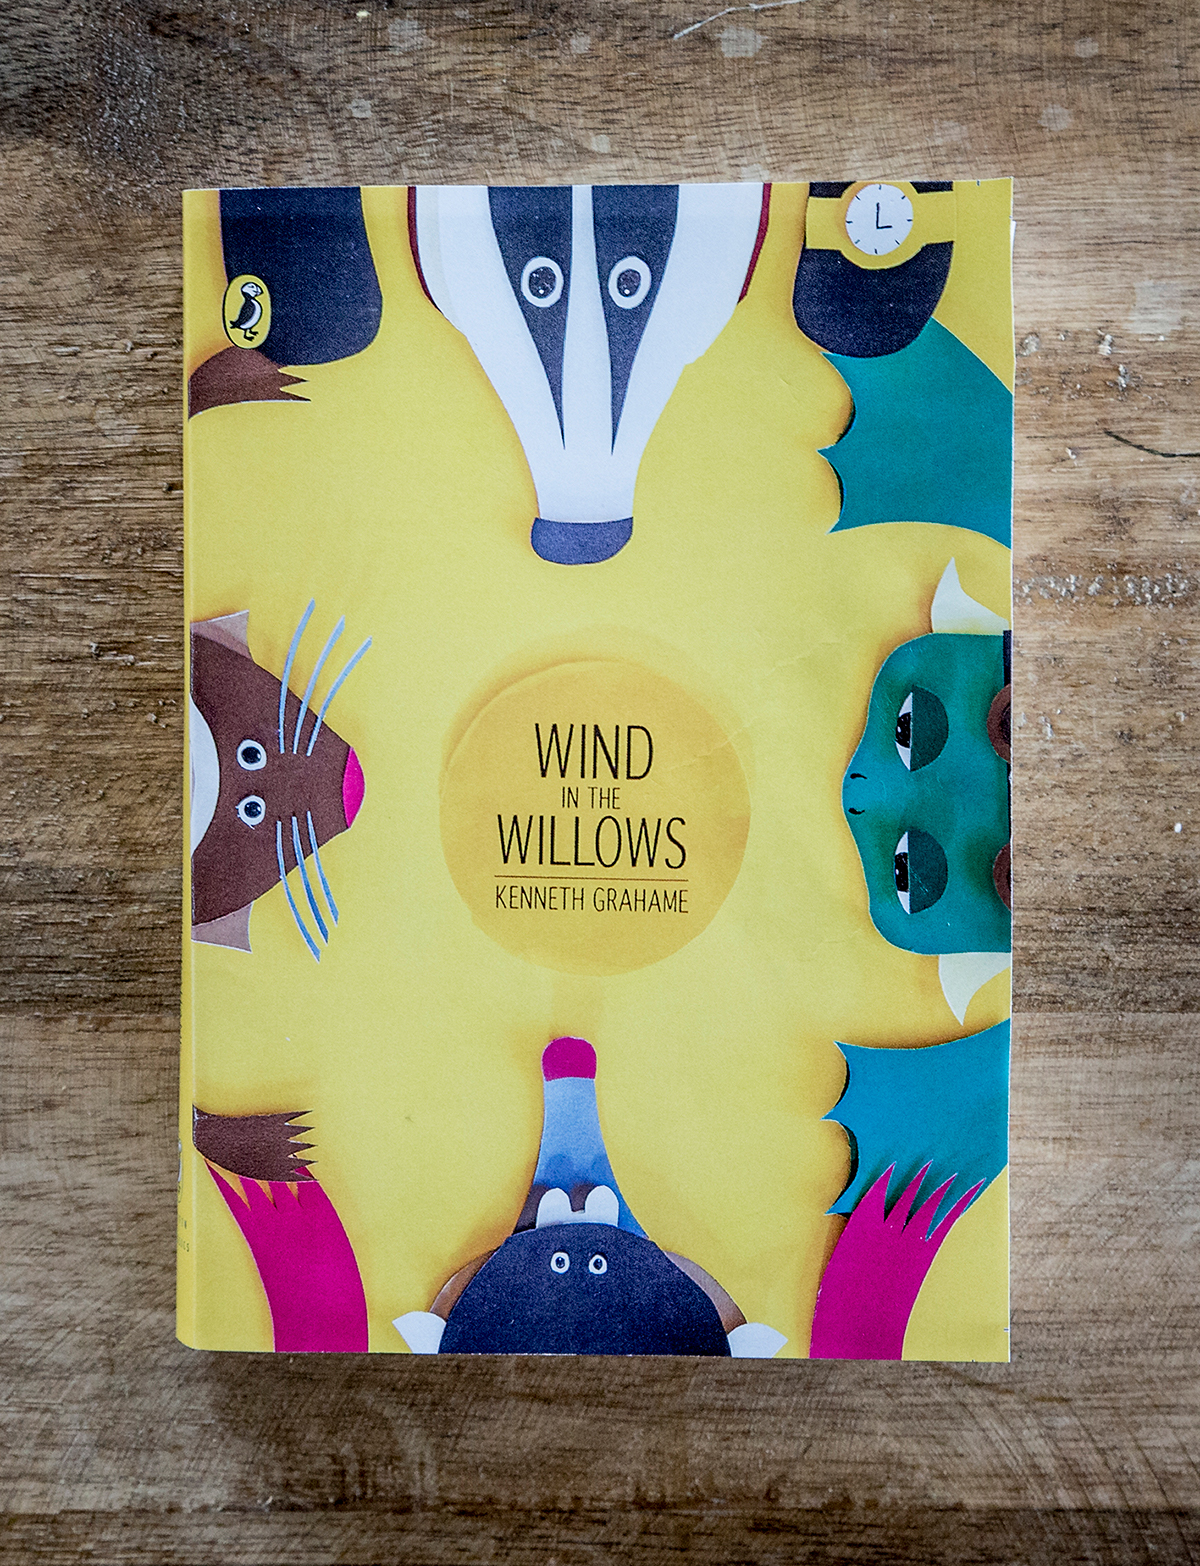 penguin book cover Awards wind IN the willows Mole ratty Mr Badger mr toad childrens craft